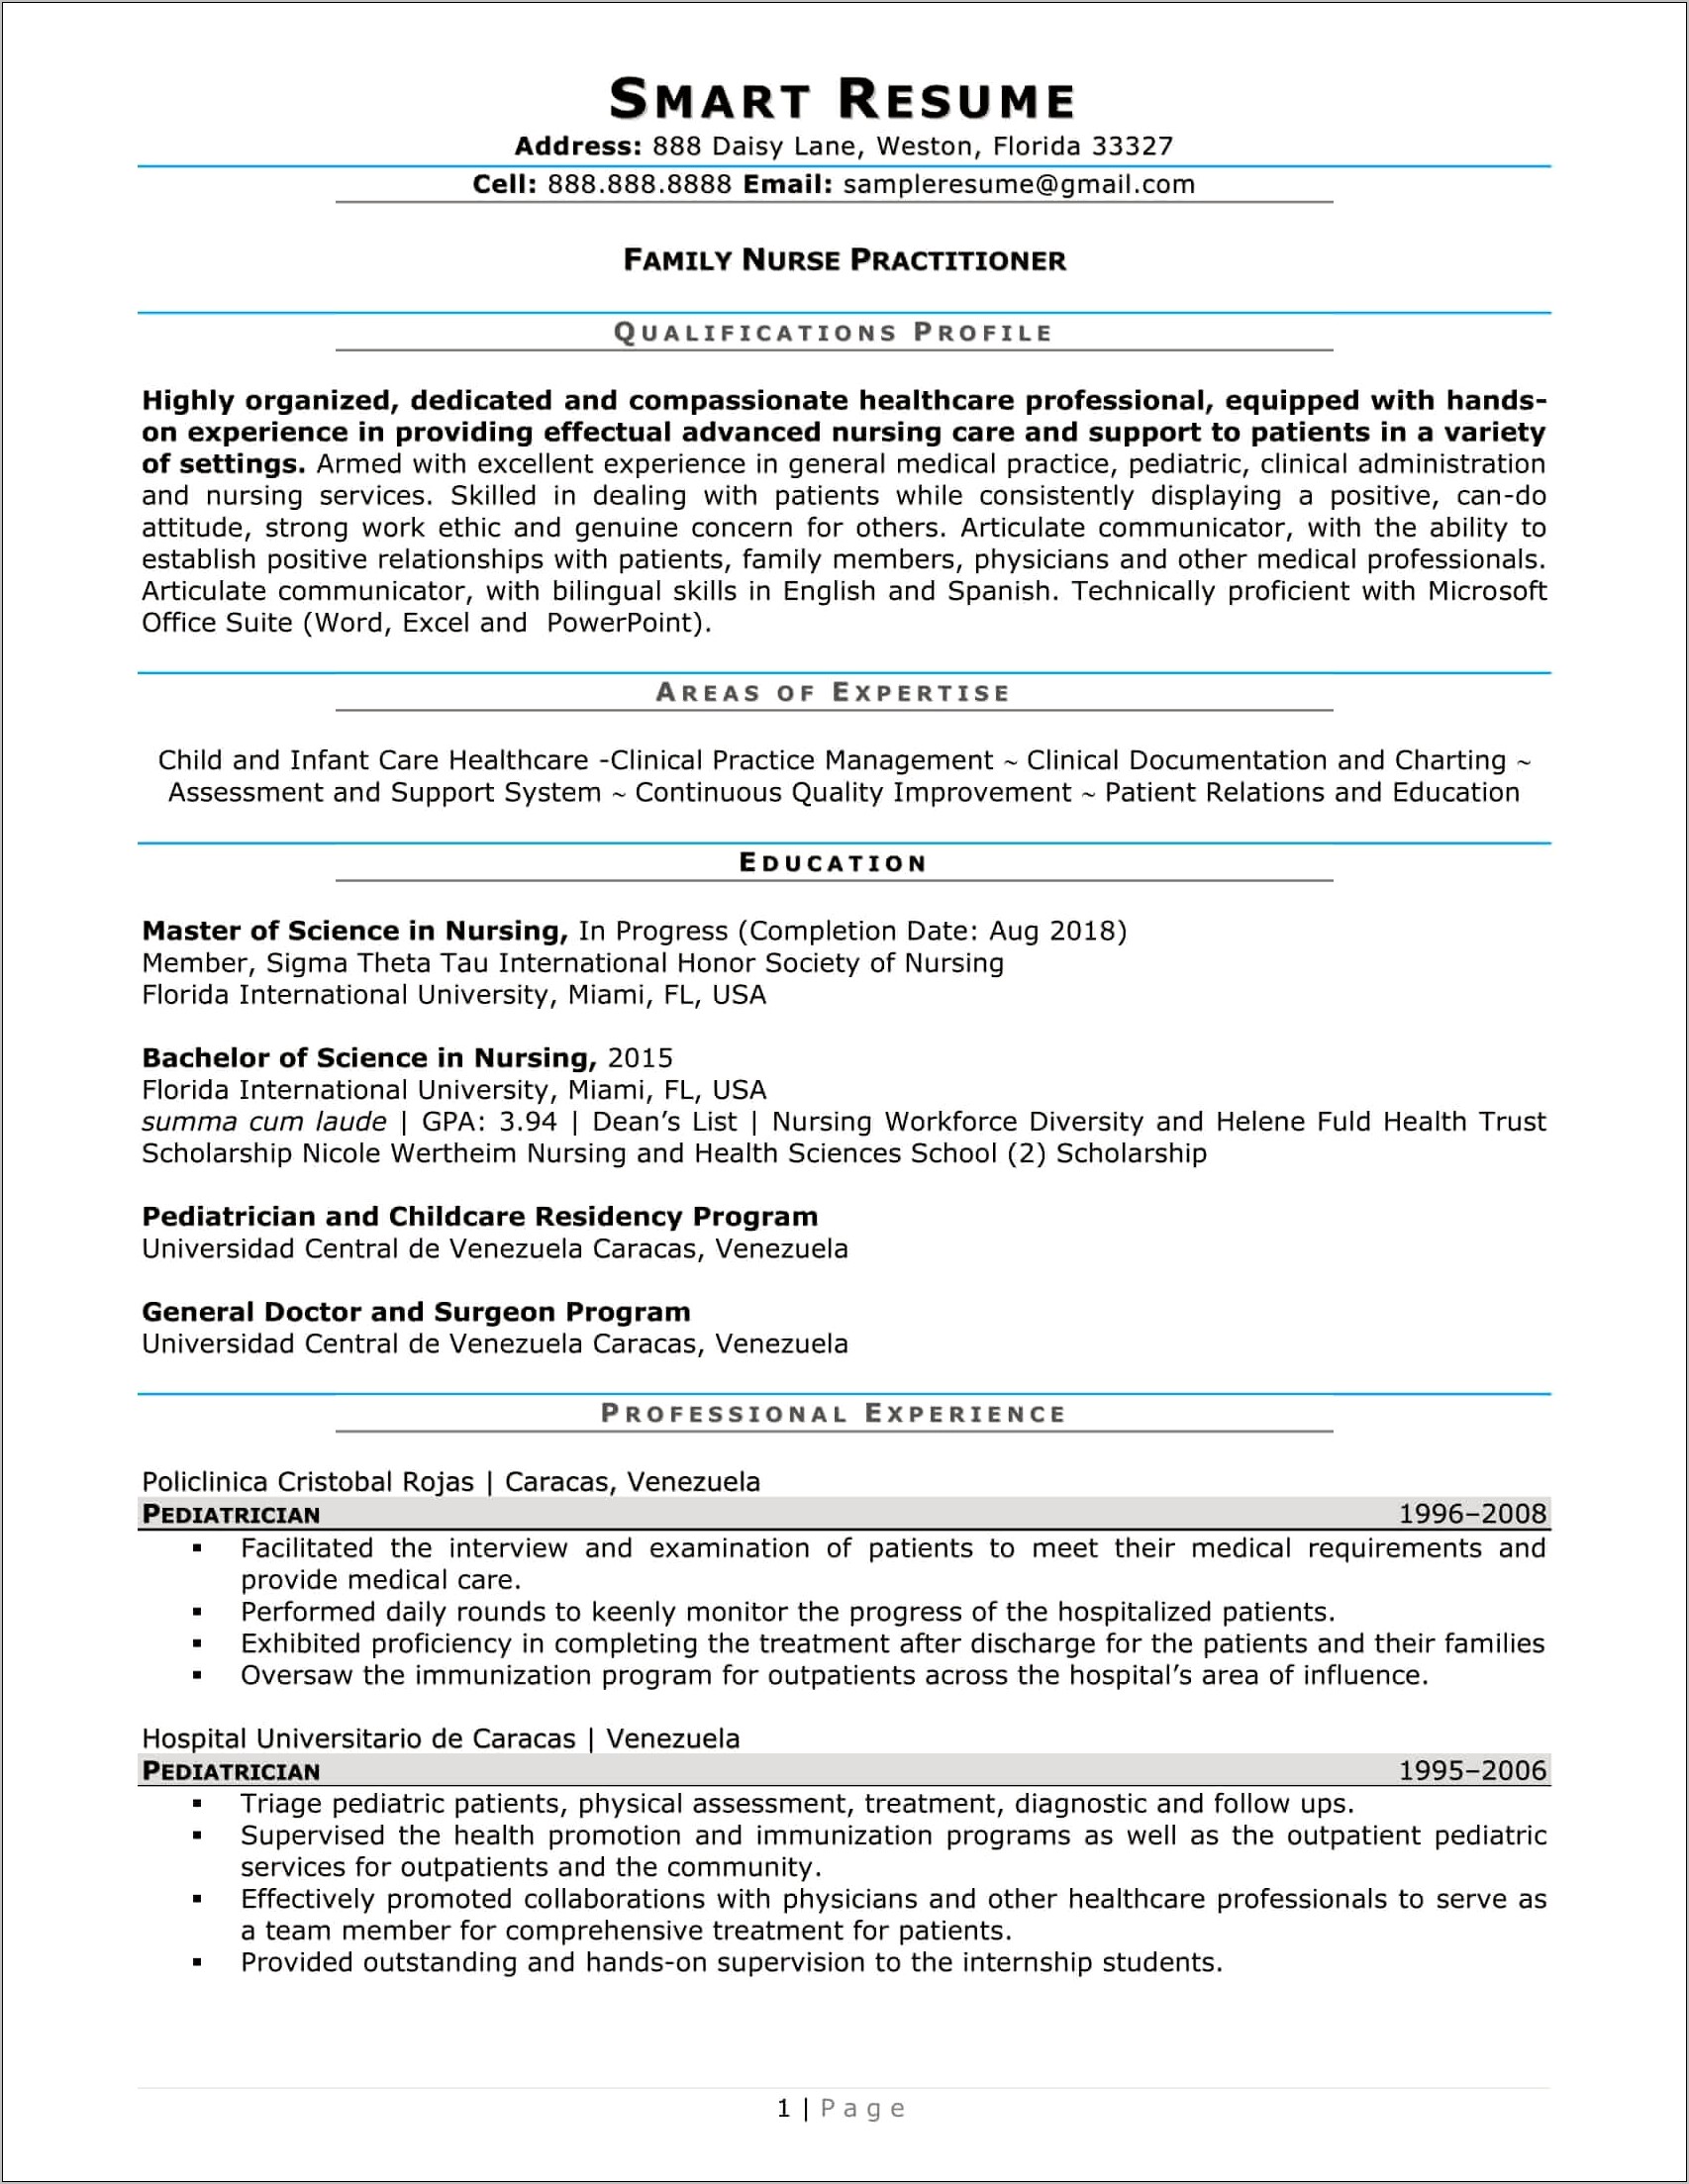 Resume Examples For Assessments In A Hospital